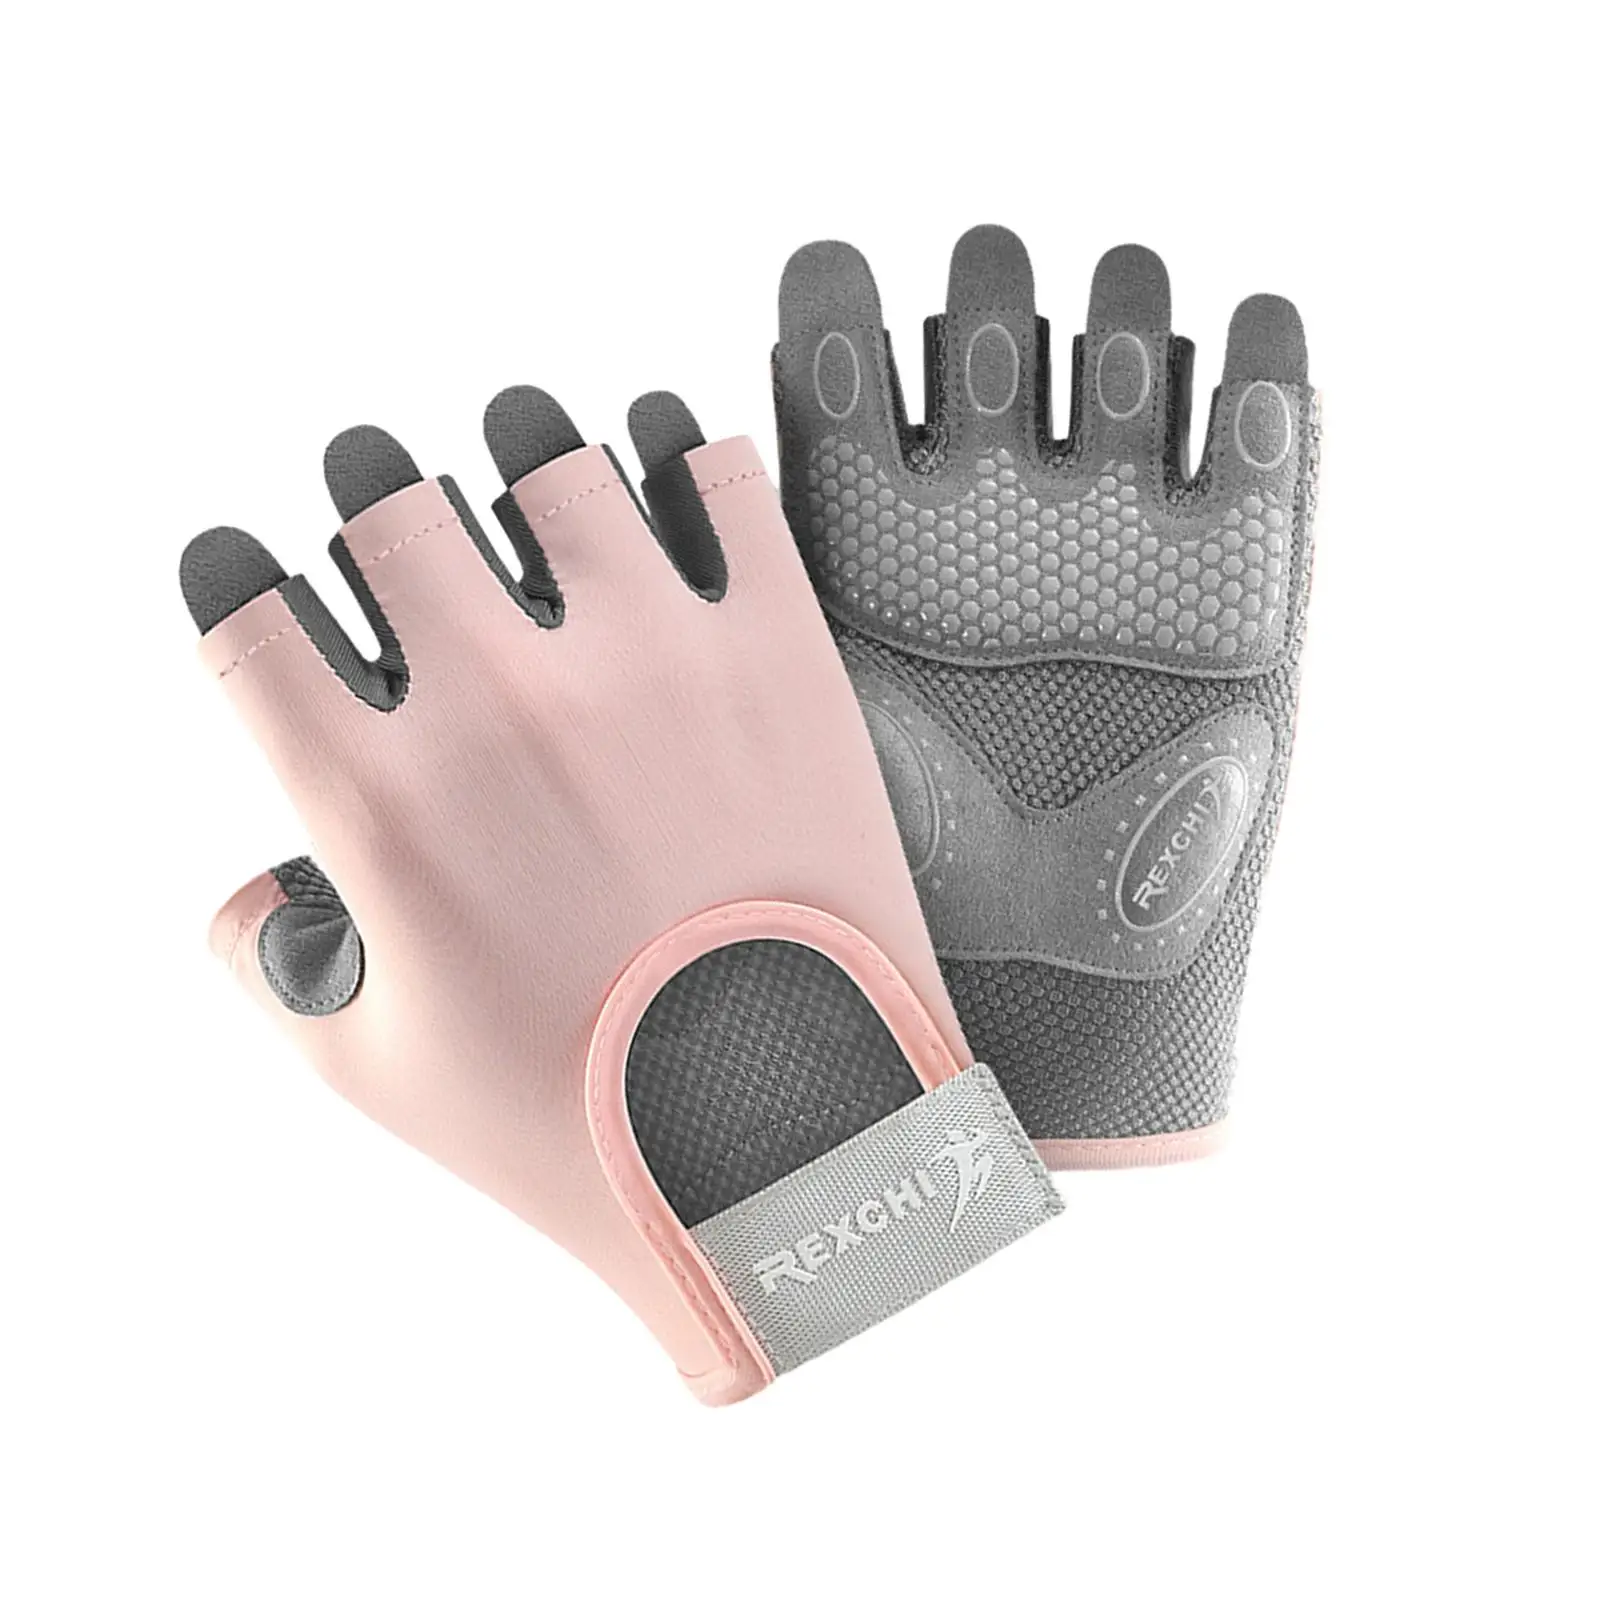 Sports Cycling Gloves Exercise Women Men Mitts Workout Weight Lifting Gloves